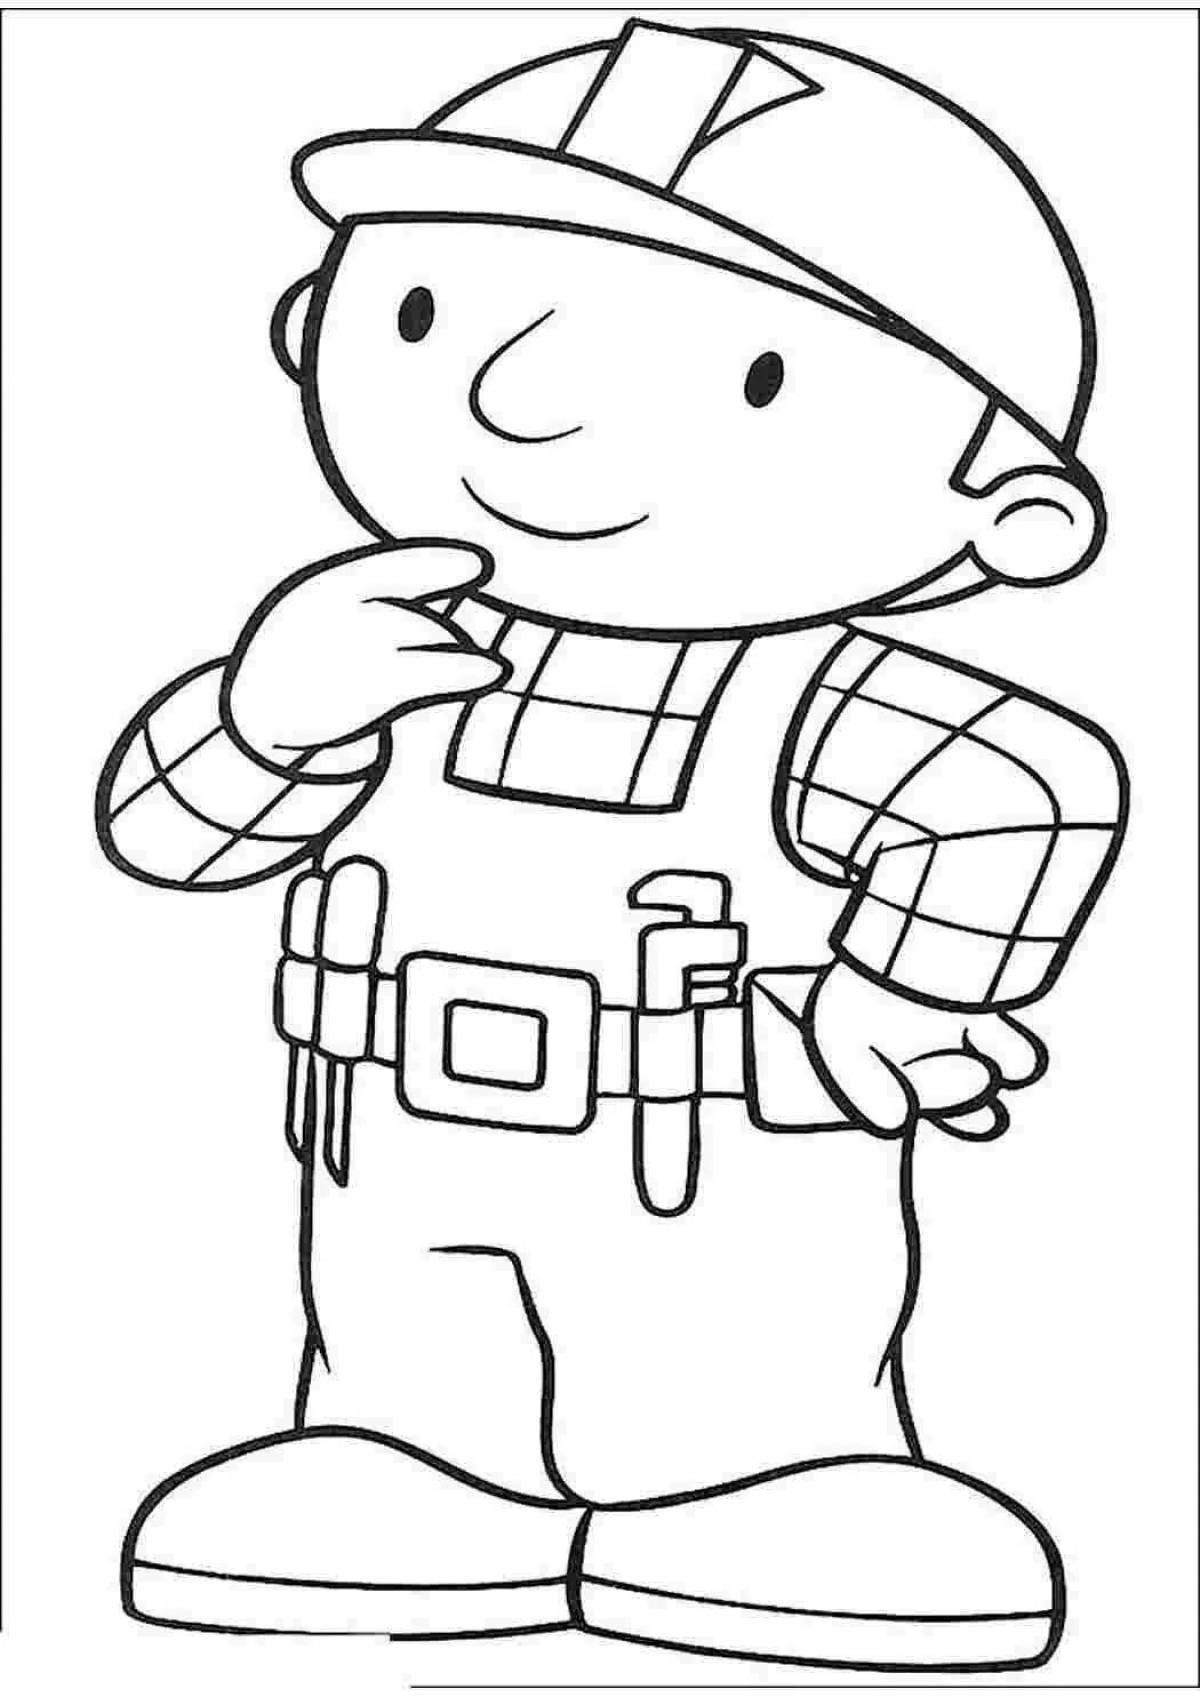 Innovative builder coloring page